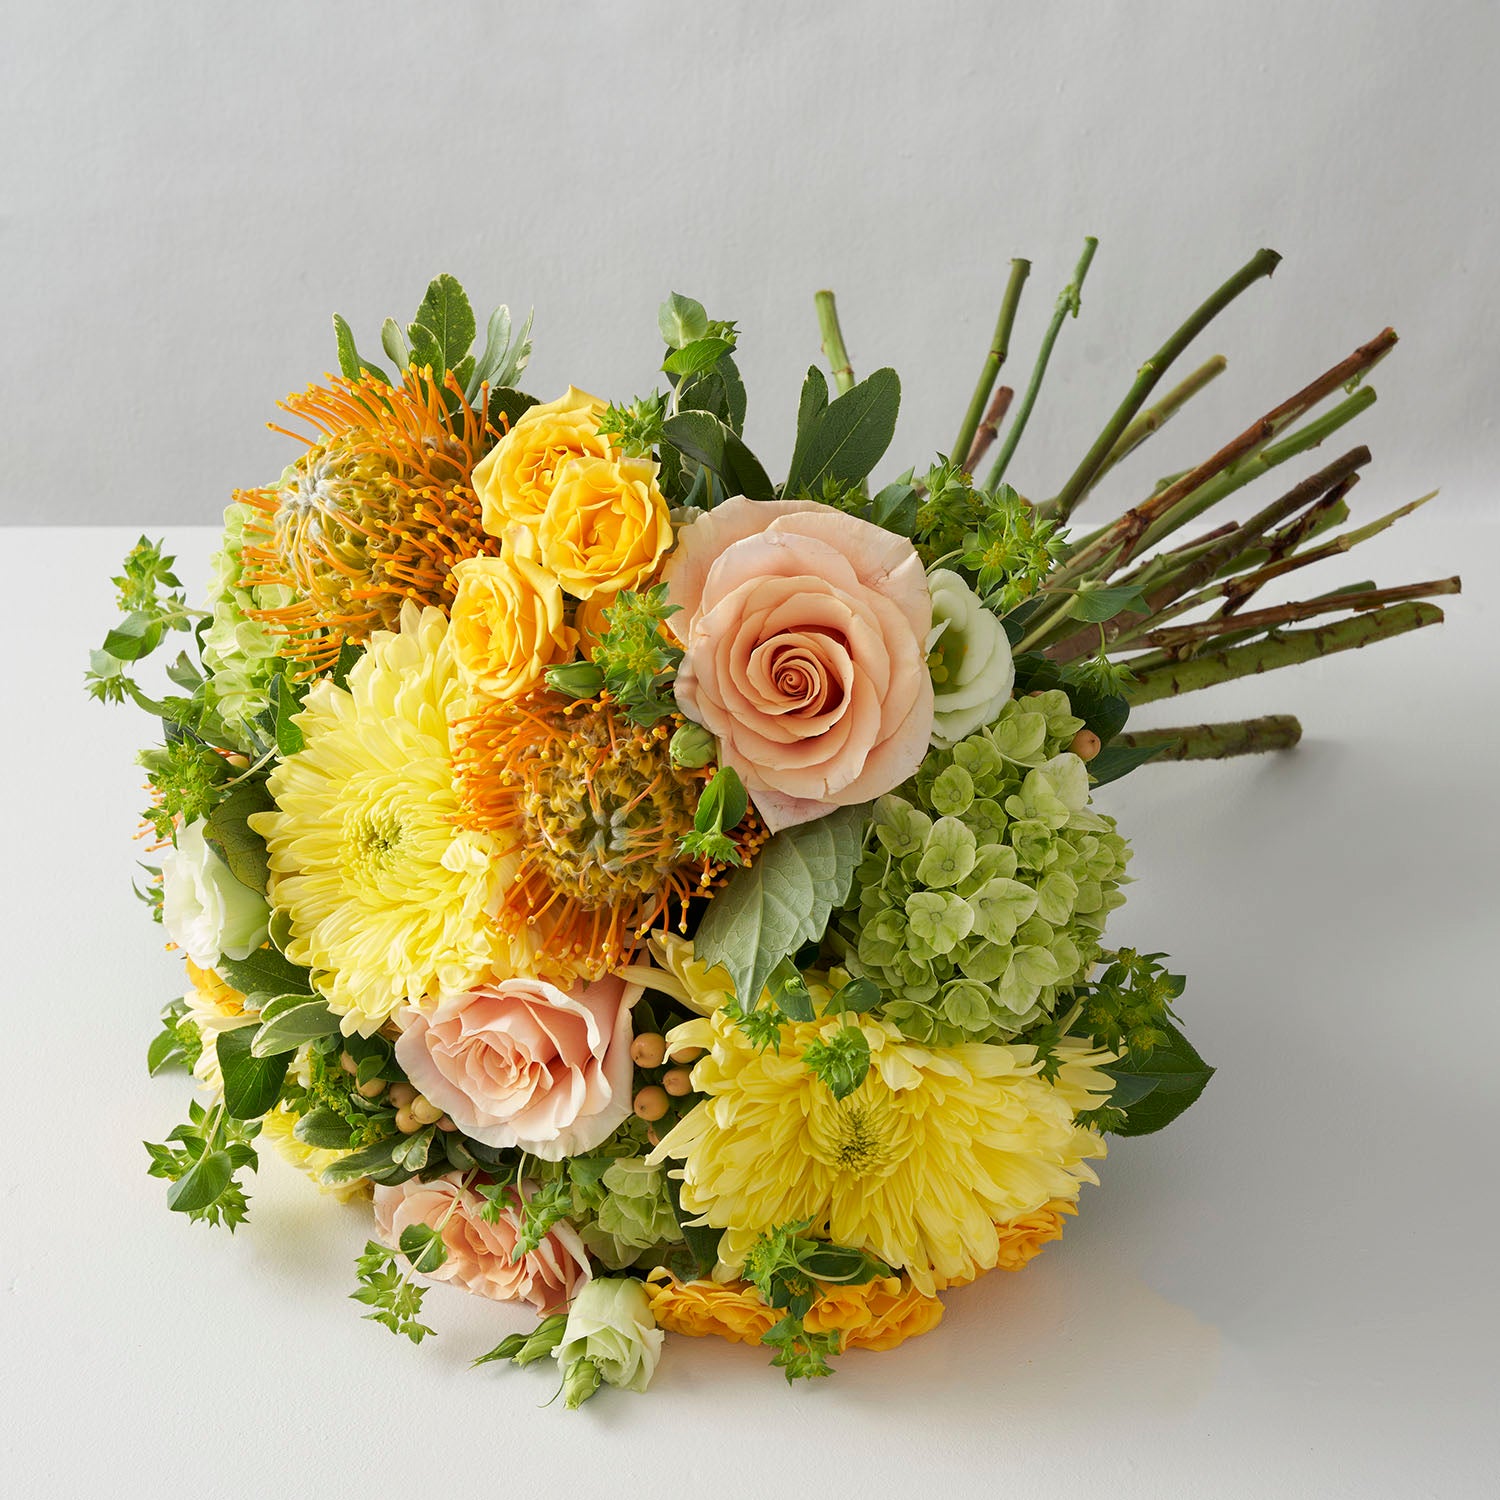 Handtied bouquet of yellow chrysanthemums, peach roses, green hydrangea, peach hypericum berries and gold protea flowers on white background.